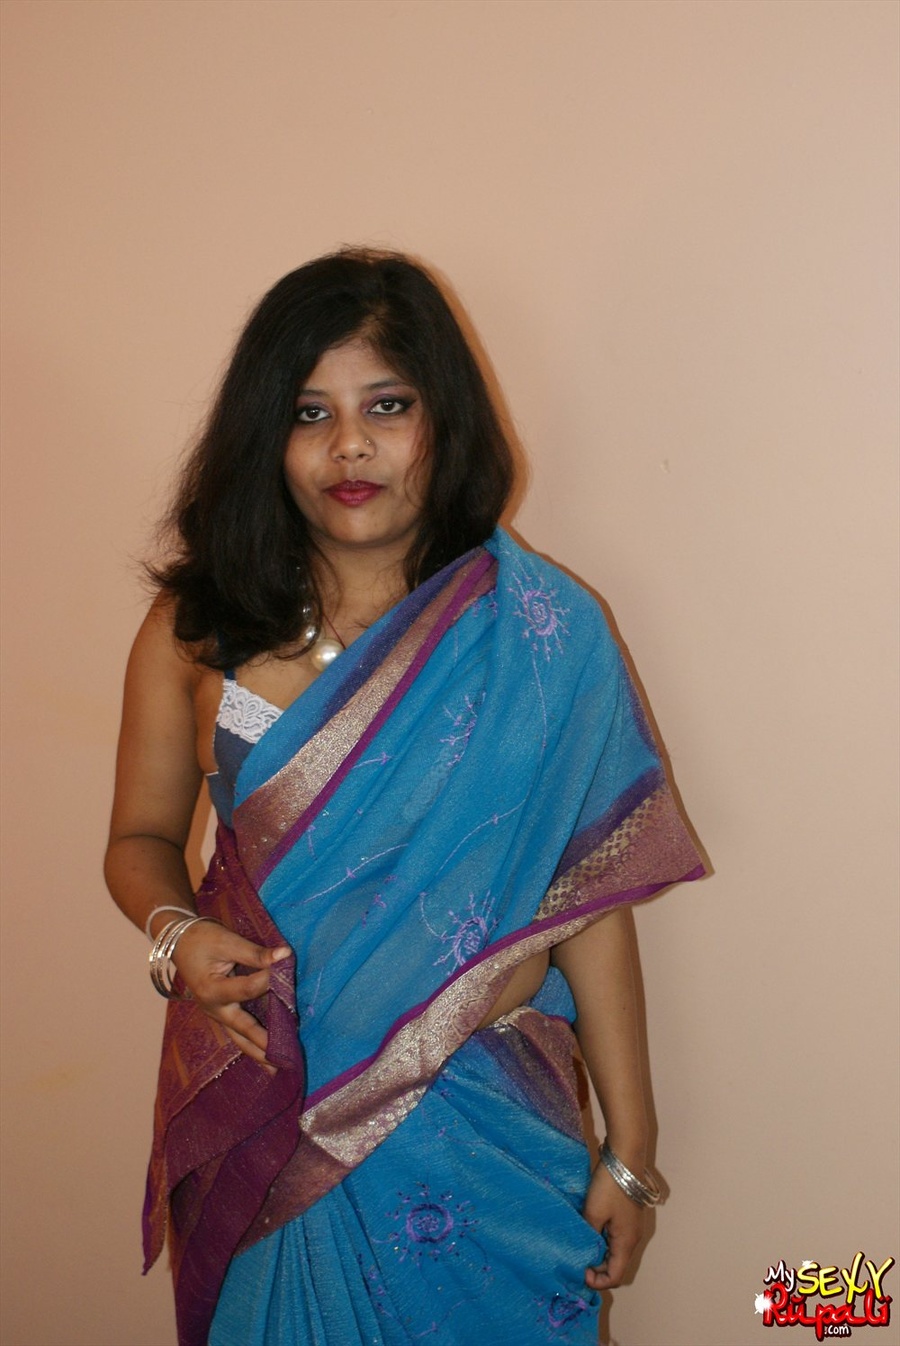 Cool pics with a real Indian girl in a blue sari undresses to expose her chubby delights on cam - XXXonXXX - Pic 1